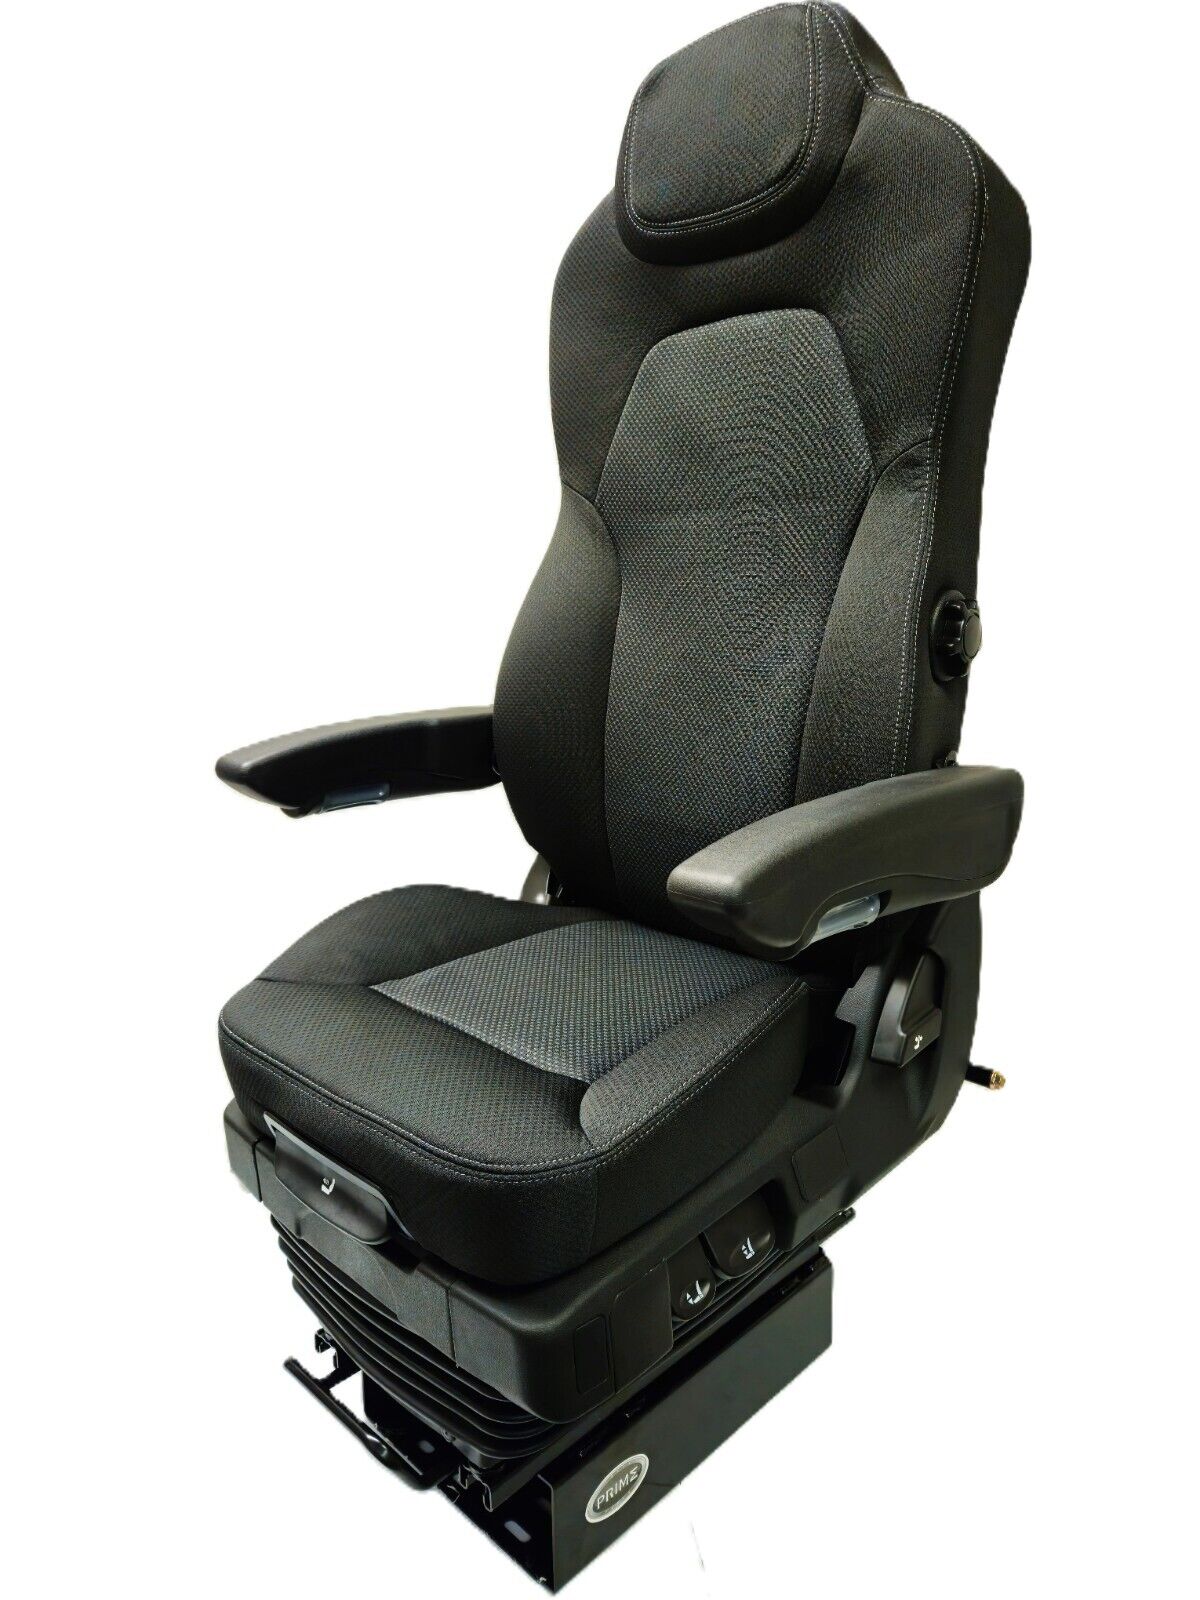 PRIME TOURING COMFORT NEW TC200C BLACK CLOTH TWO TONE AIR RIDE TRUCK SEAT